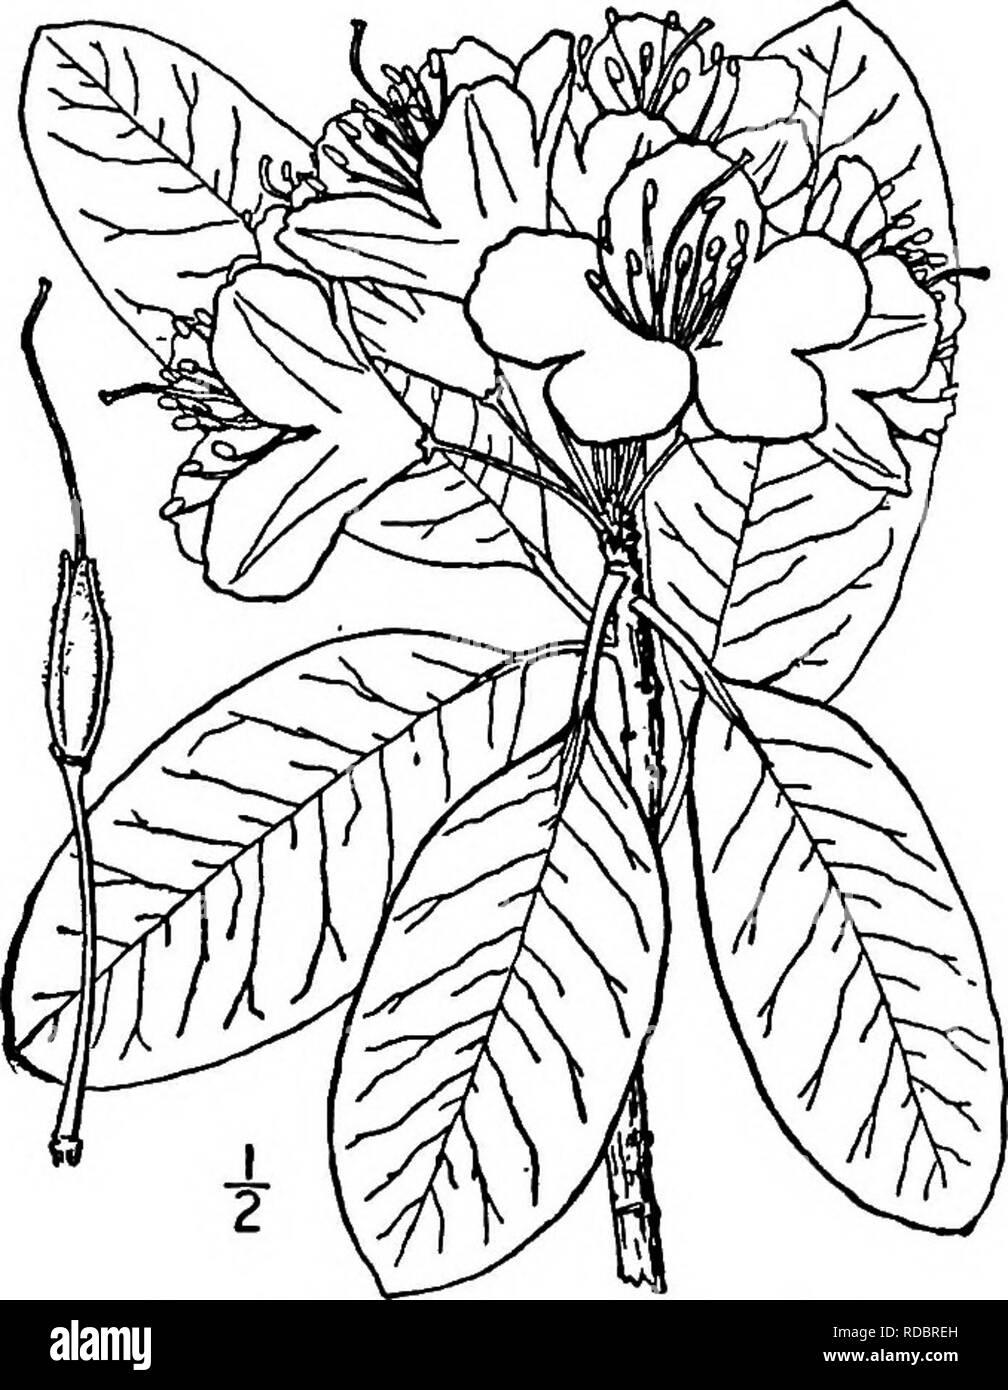 . North American trees : being descriptions and illustrations of the trees growing independently of cultivation in North America, north of Mexico and the West Indies . Trees. Fig. 688. — Mountain Rose Bay. 2. MOUNTAIN ROSE BAY Rhododendron catawbiense Michaux This evergreen shrub, sometimes be- comes a small tree, and is also called Catawba Rhododendron and Carolina Rho- dodendron. It occurs mostly on moun- tain sides and summits, from Virginia and West Virginia to Georgia and Alabama, attaining a maximum height of 6 meters, with a trunk diameter of i dm. The trunk is short, crooked, and much  Stock Photo